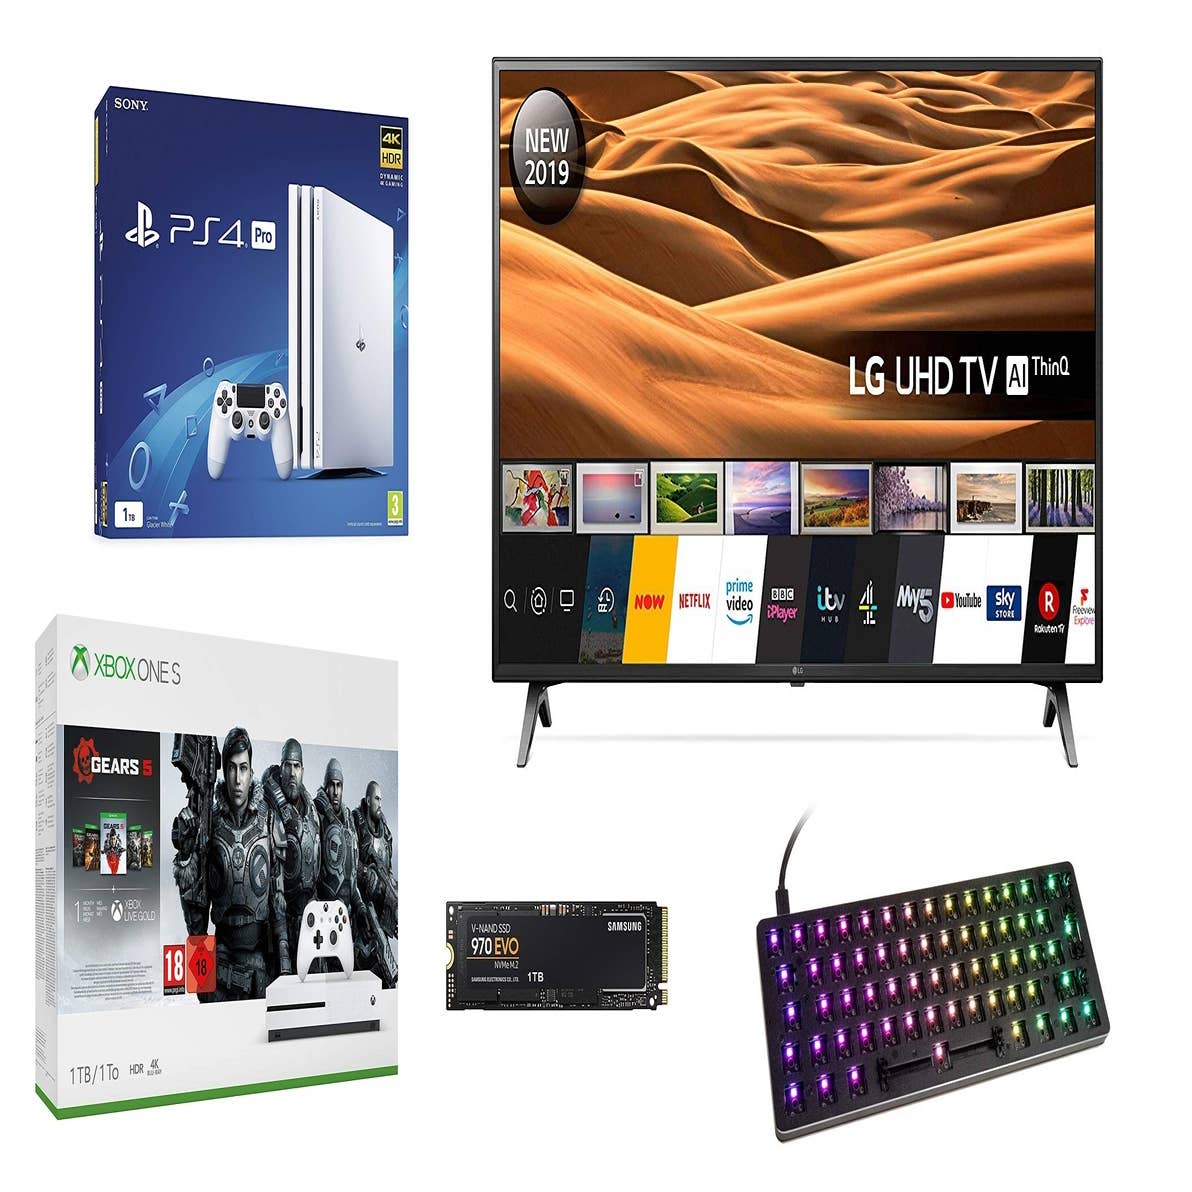 Grab heavily discounted gaming gear in 's Warehouse sale